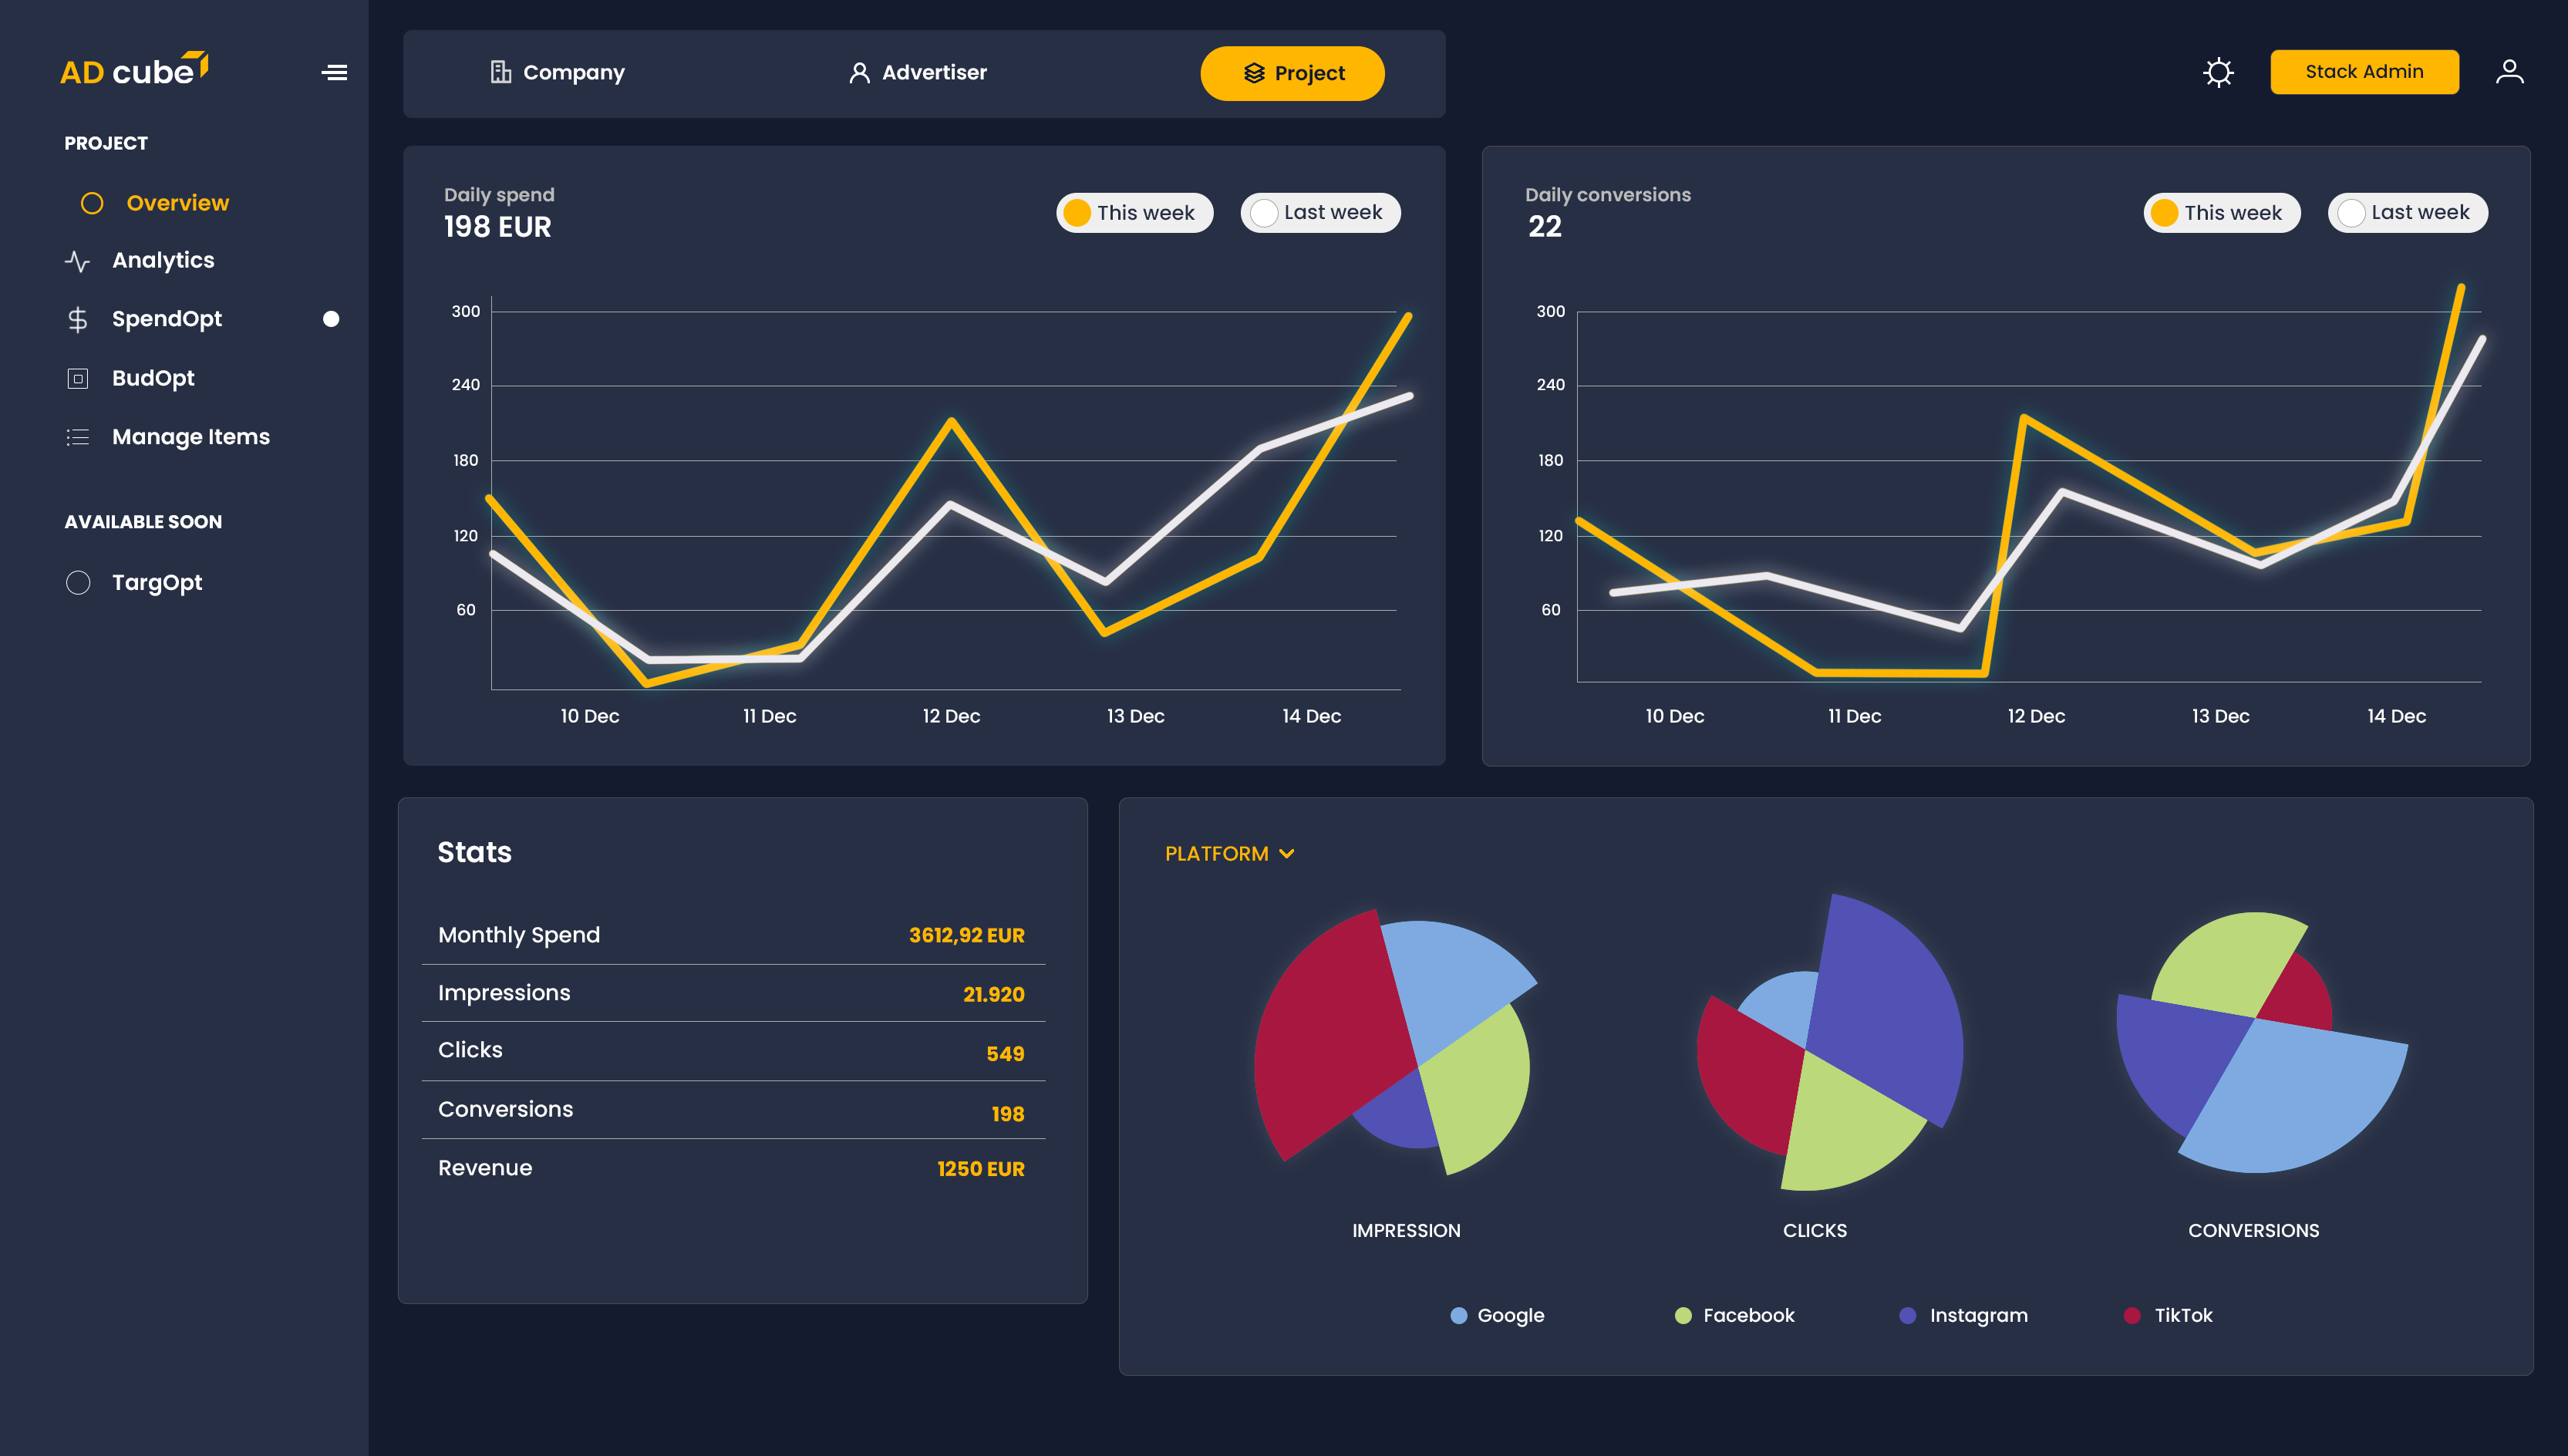 In the overview section, you can analyze your campaigns' performance in a blink of an eye